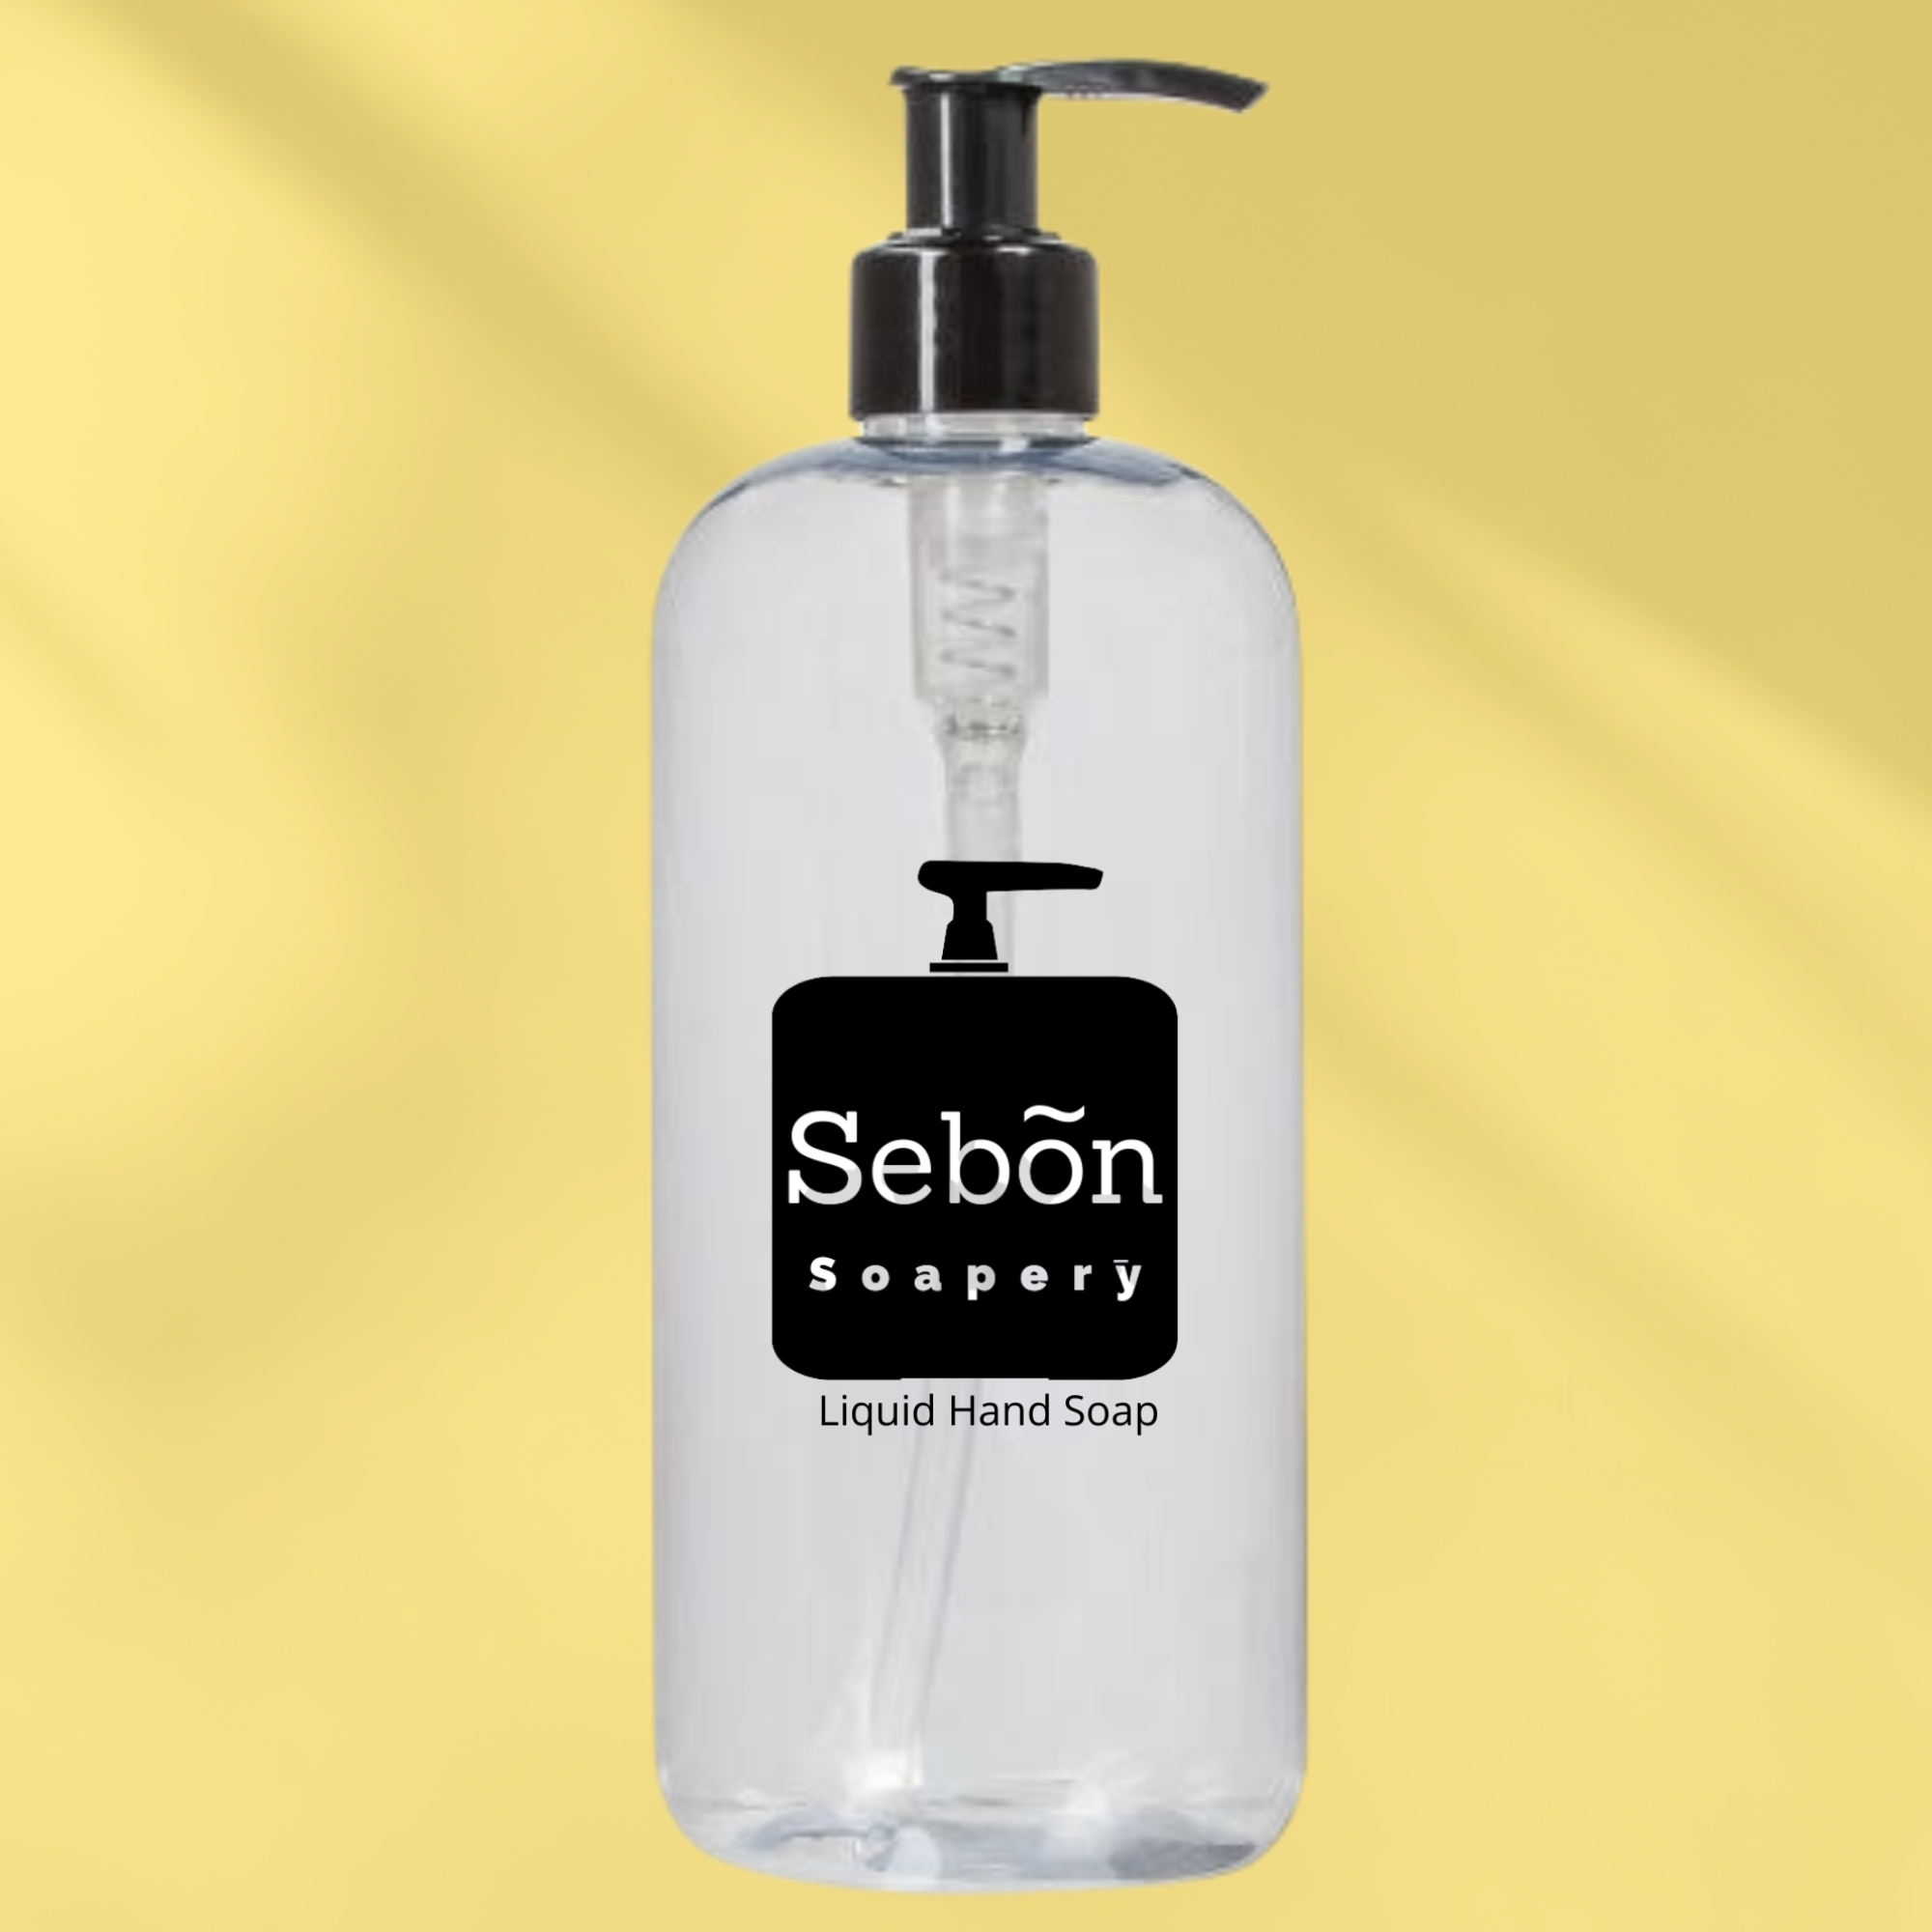 Sebon Blackberry & Fir Scented Liquid Hand Soap with Olive Oil